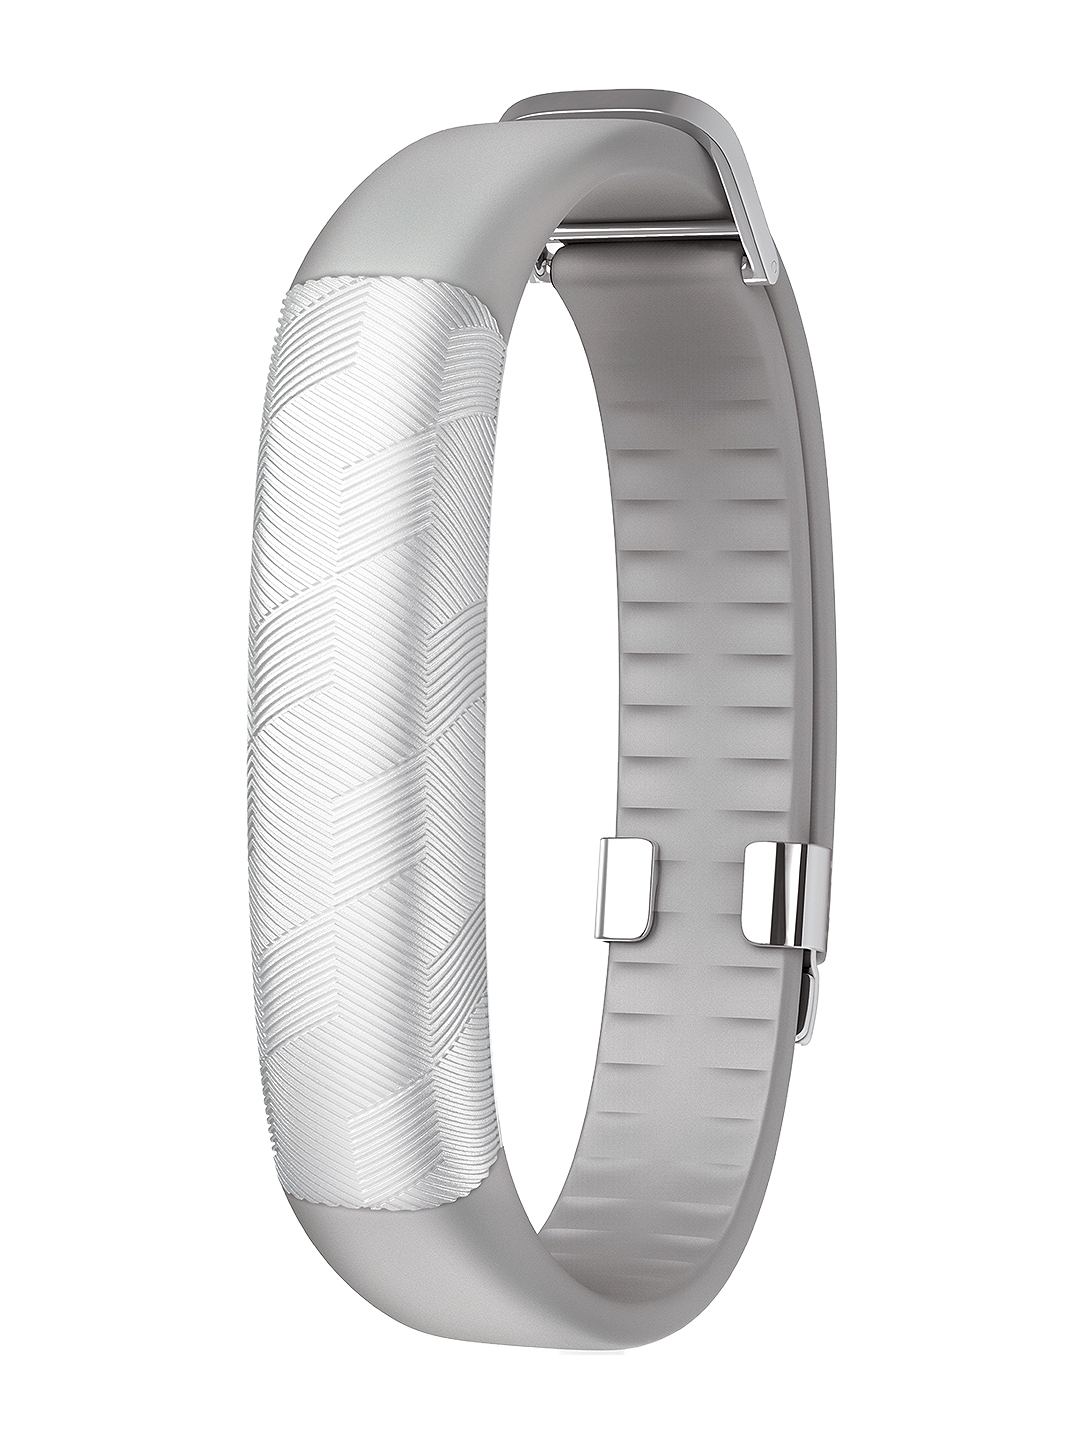 Review Jawbone UP Fitness Band  YouTube